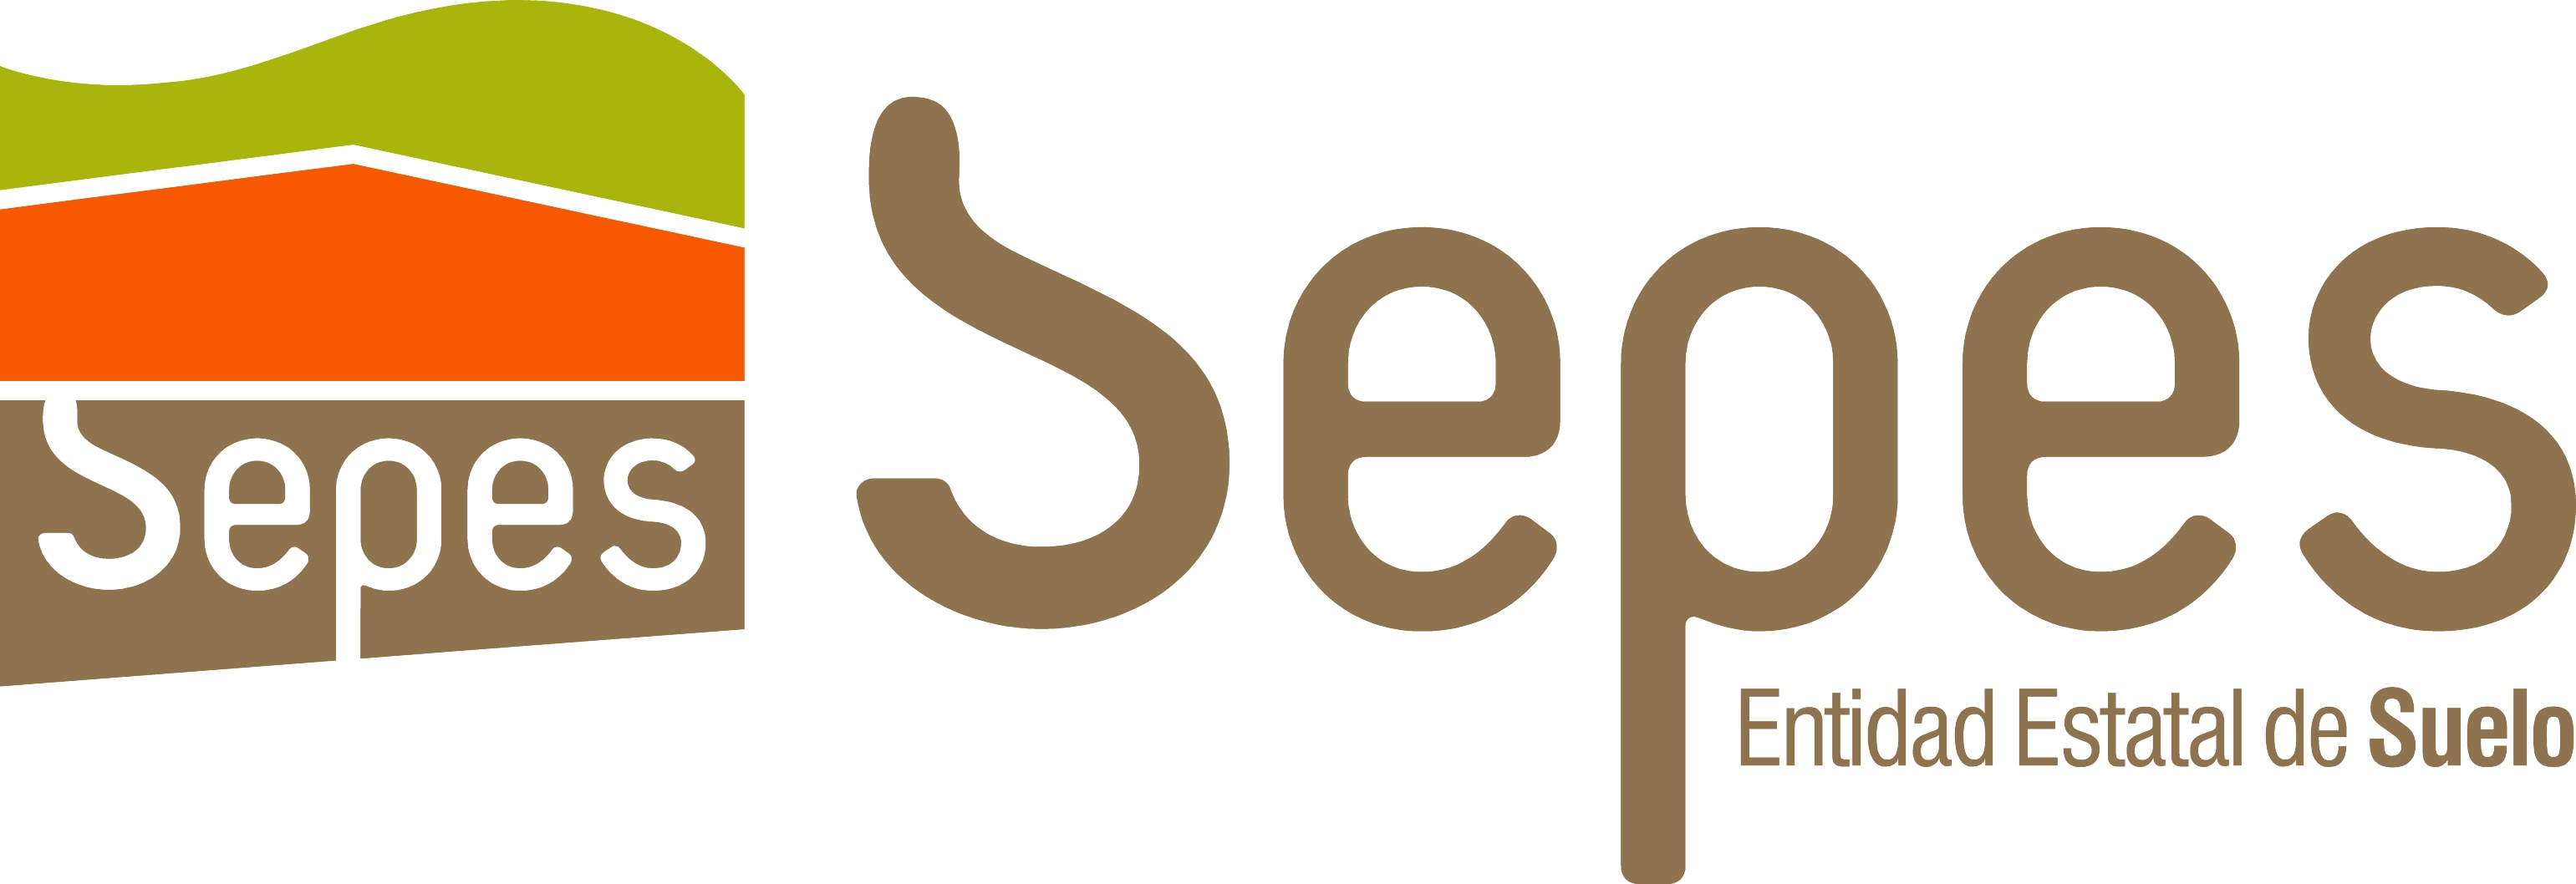 Sepes